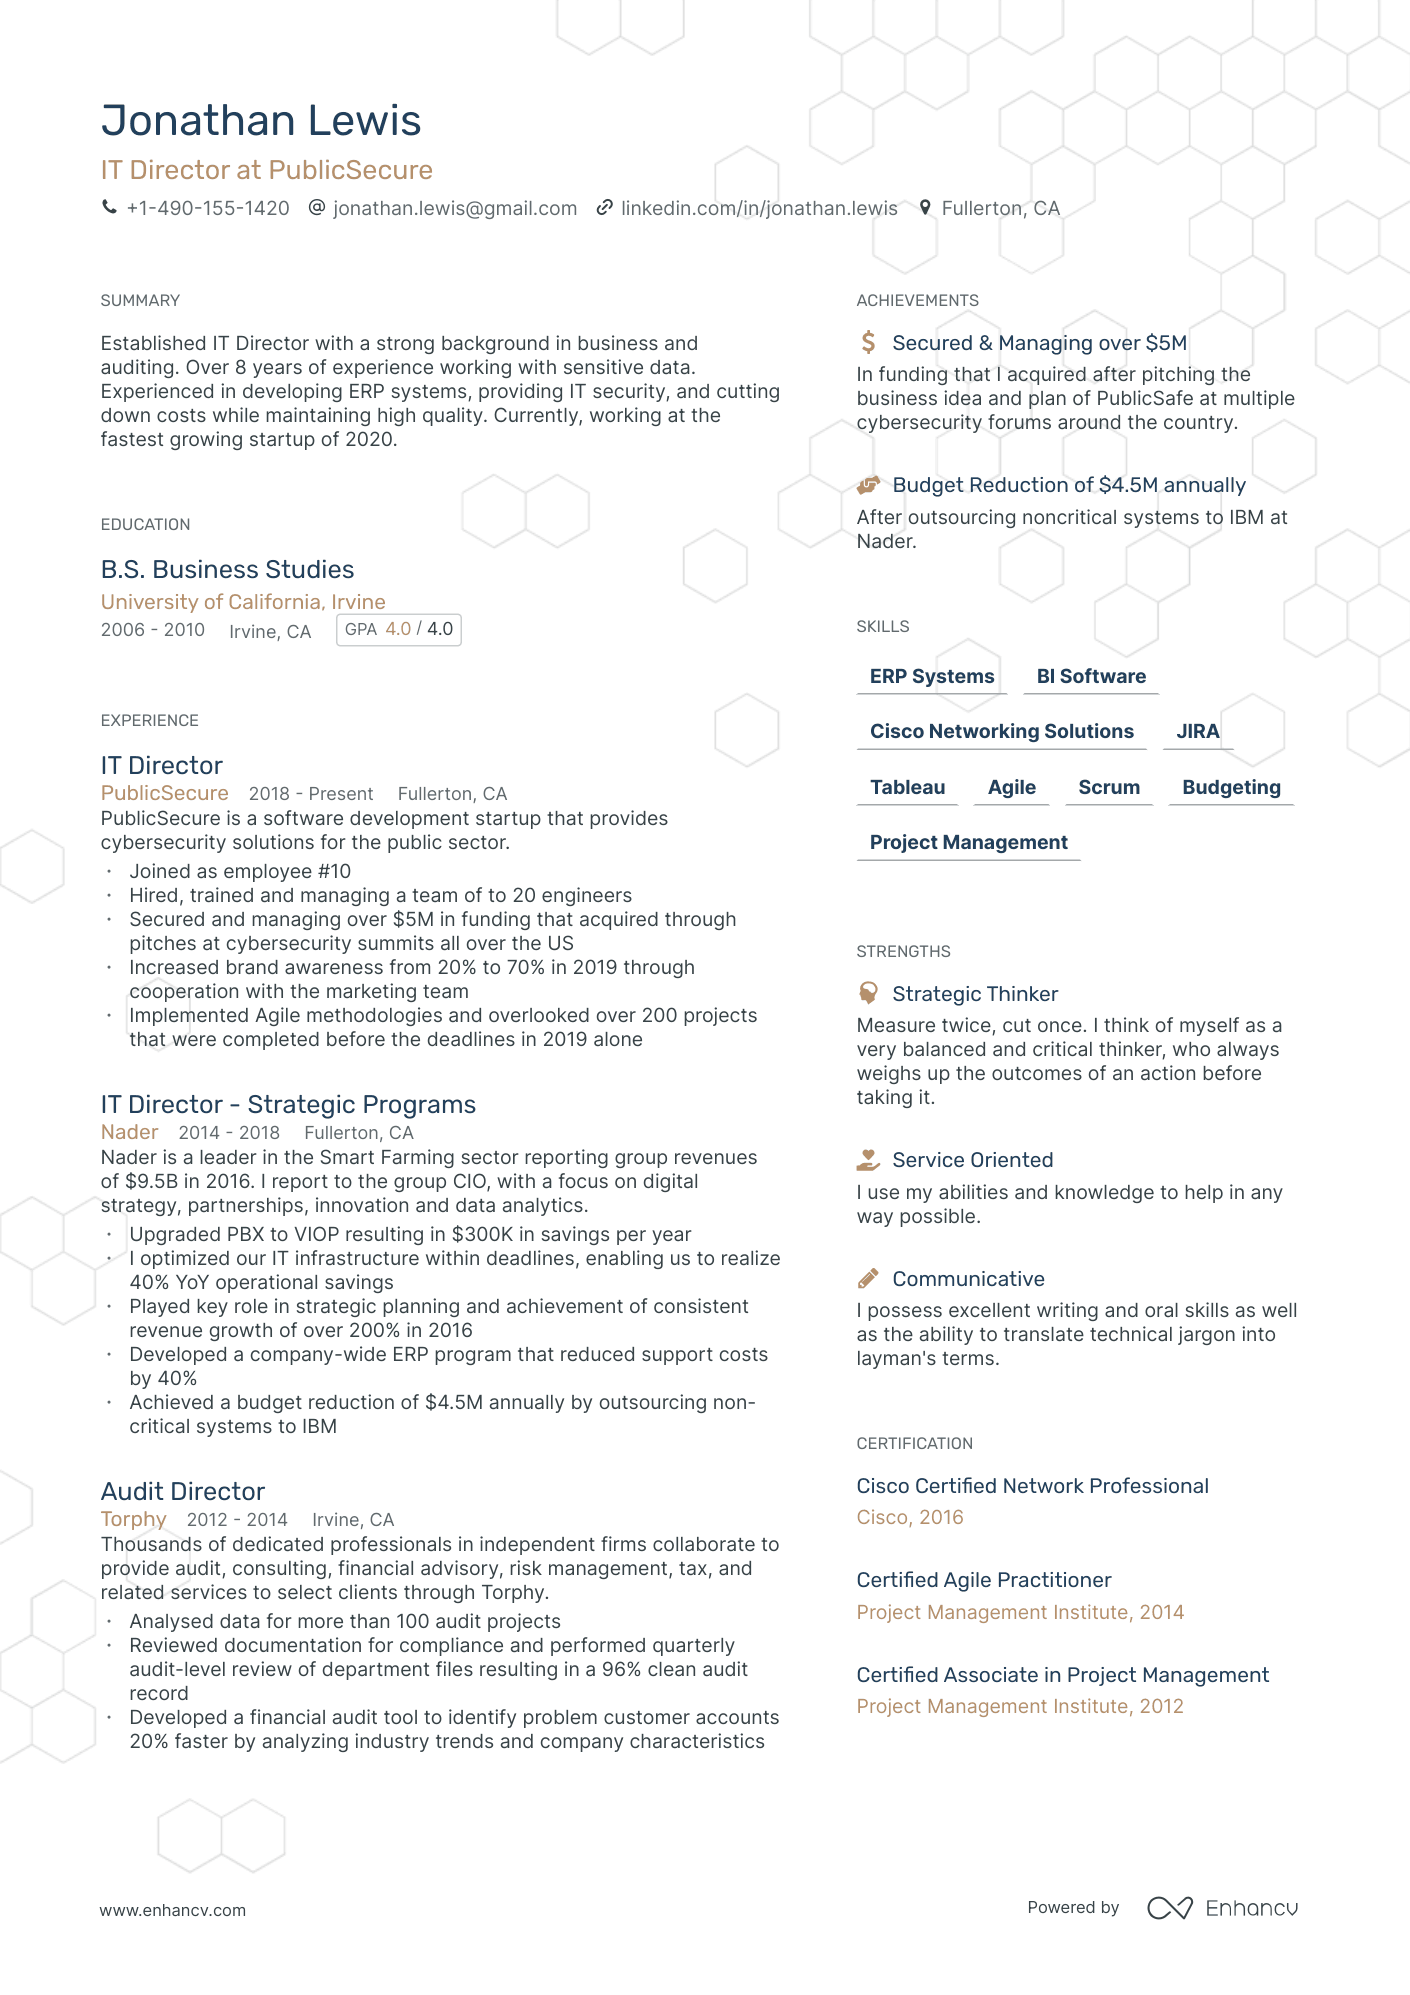 Single page IT director resume